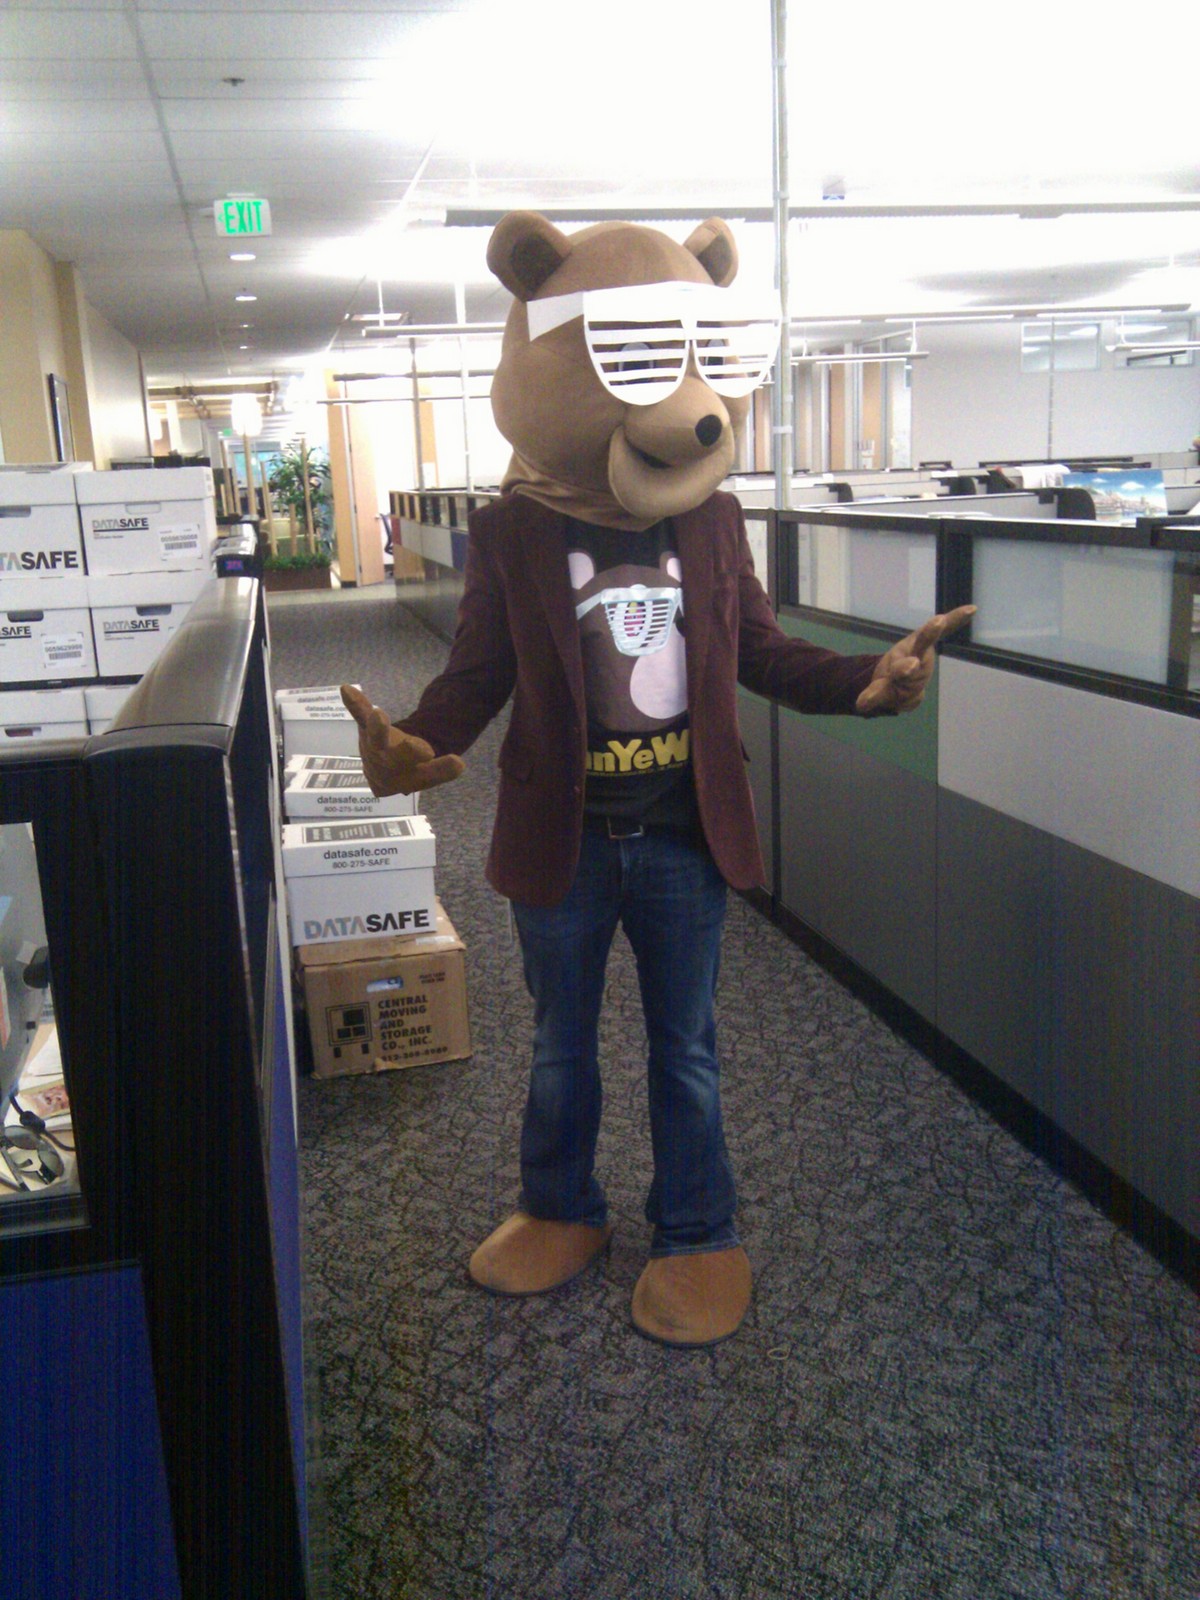 an image of a person in a bear suit with glasses